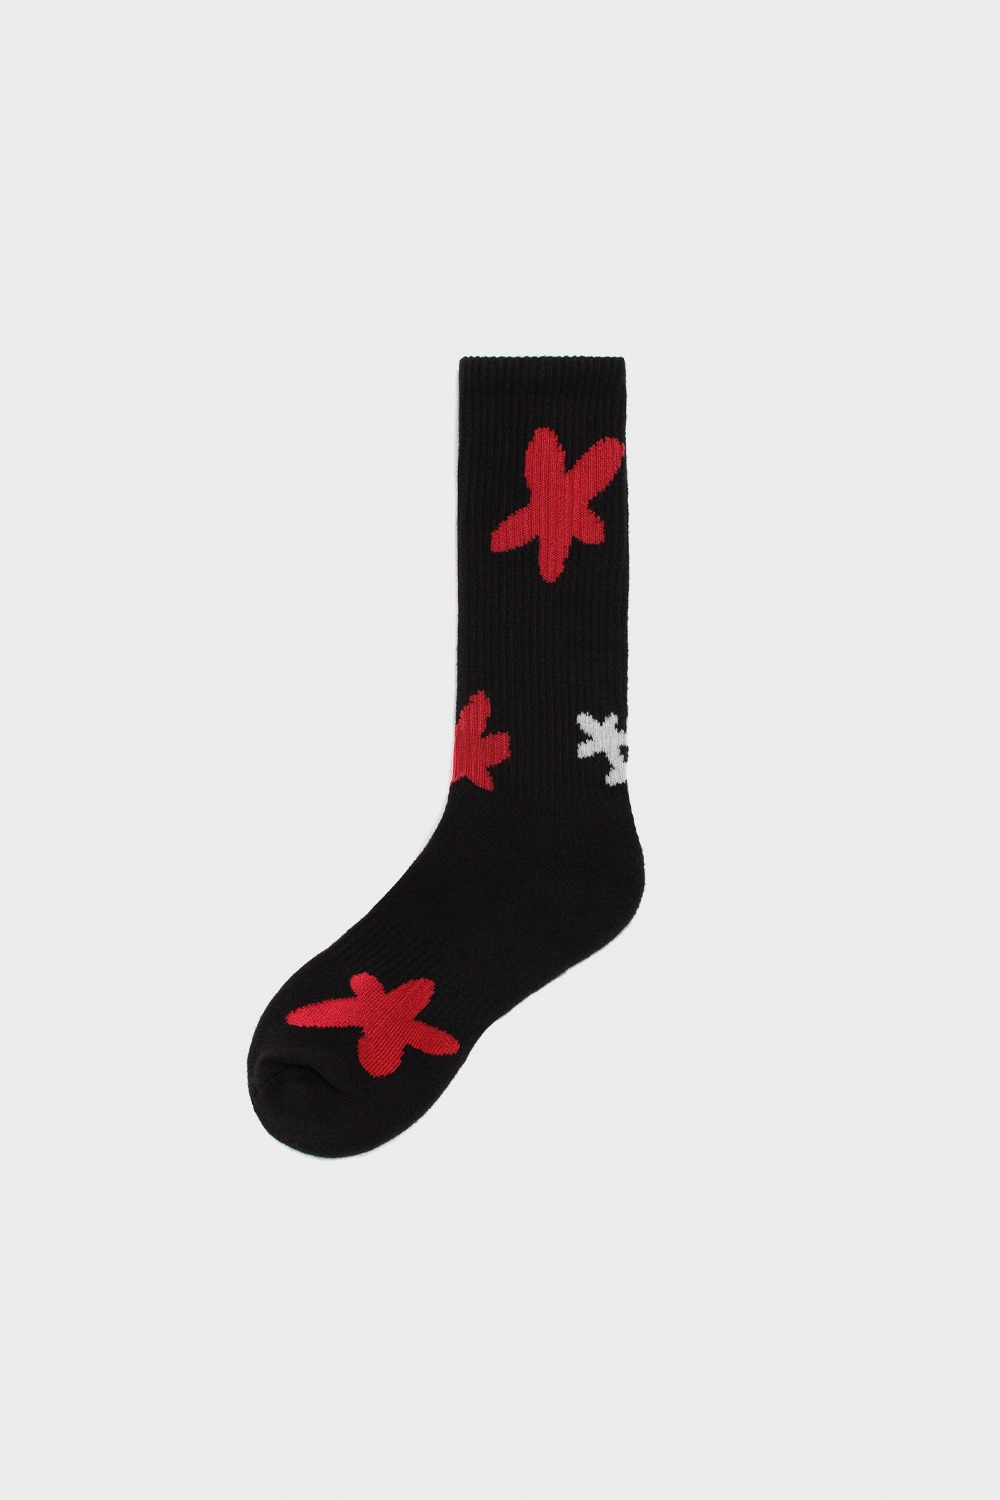 [Steady Bourie] Flower Drawing Socks_RDWH